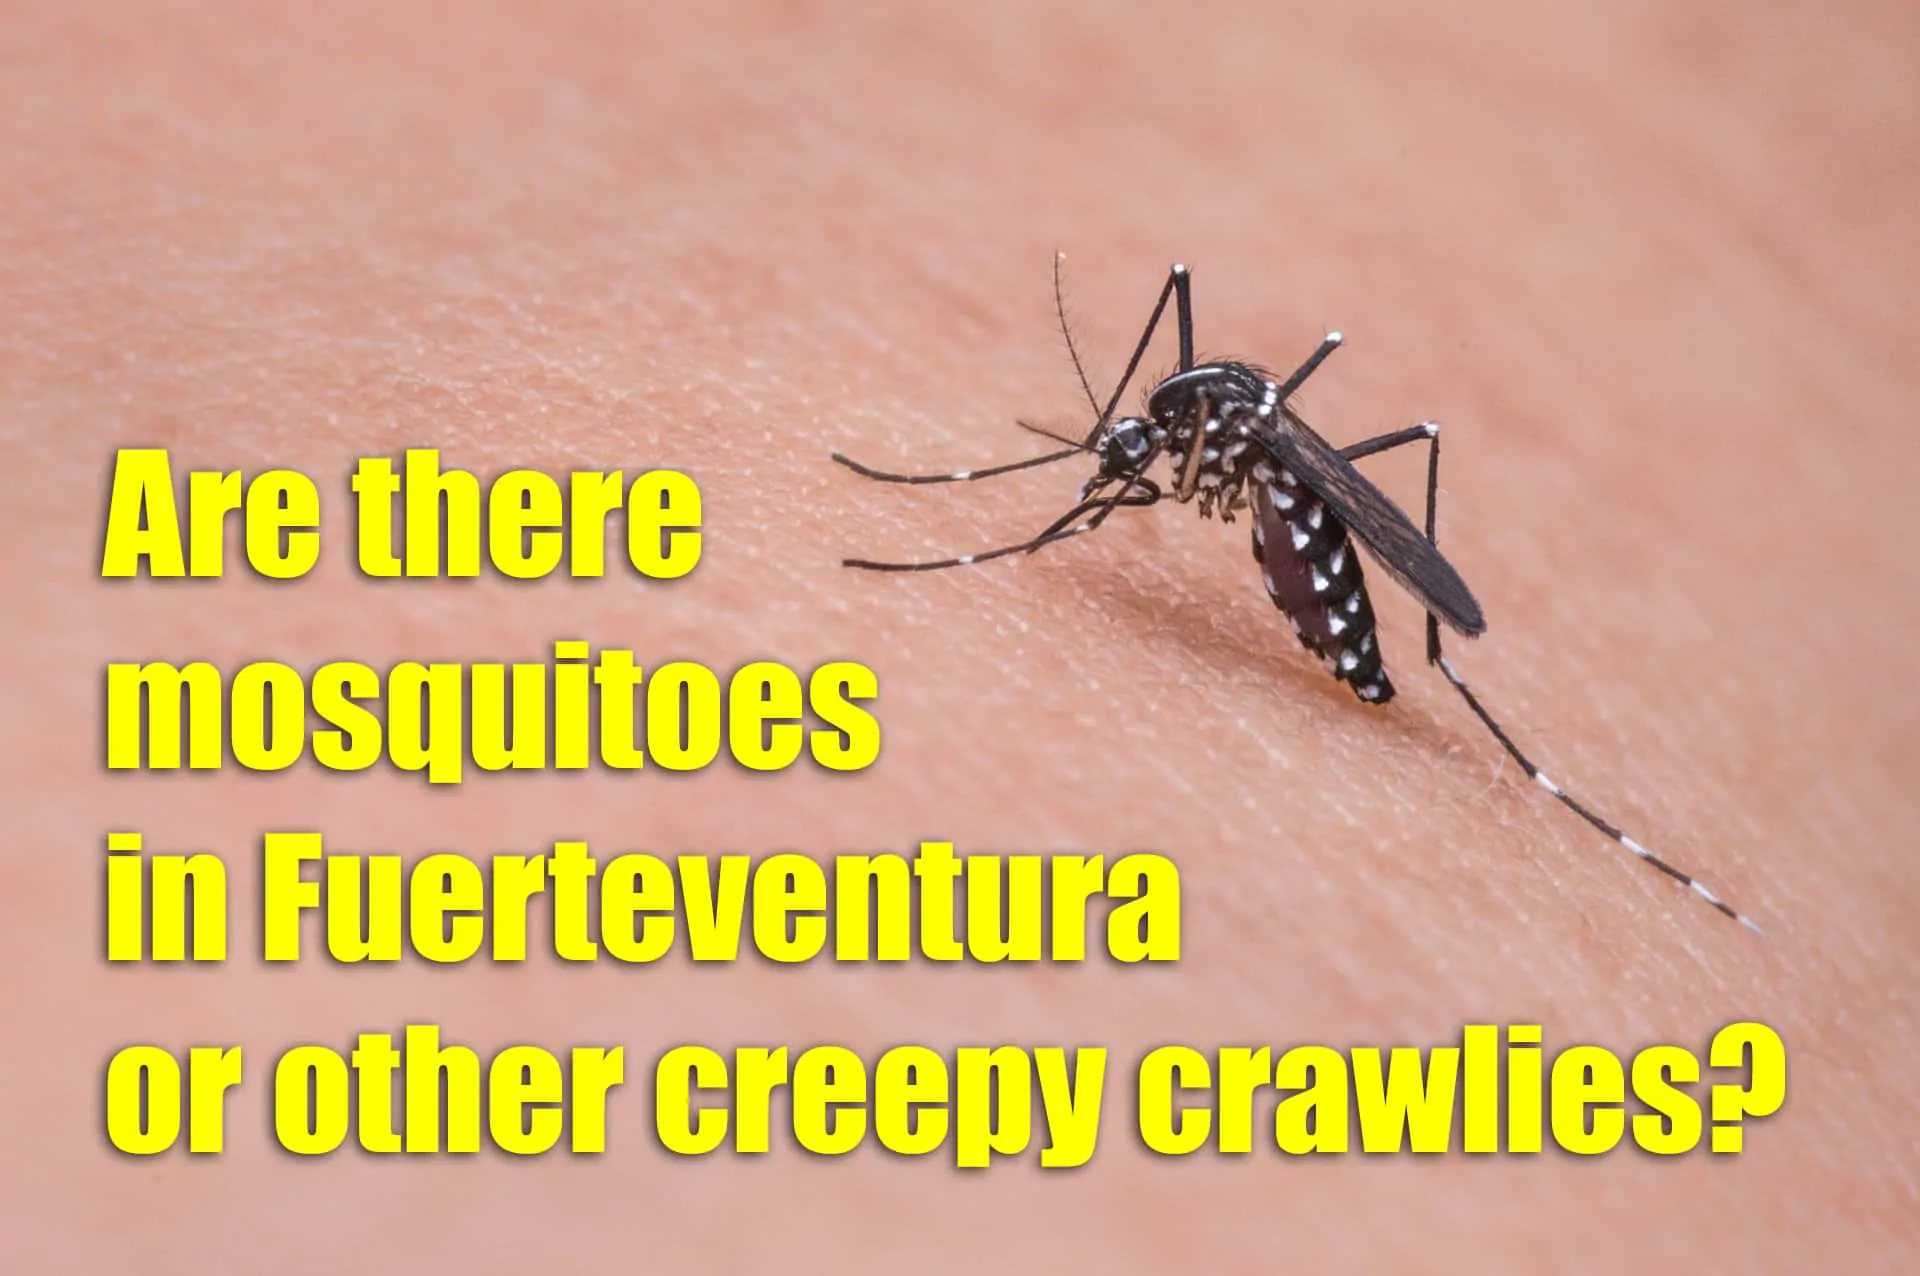 Are there mosquitoes in Fuerteventura or other creepy crawlies?